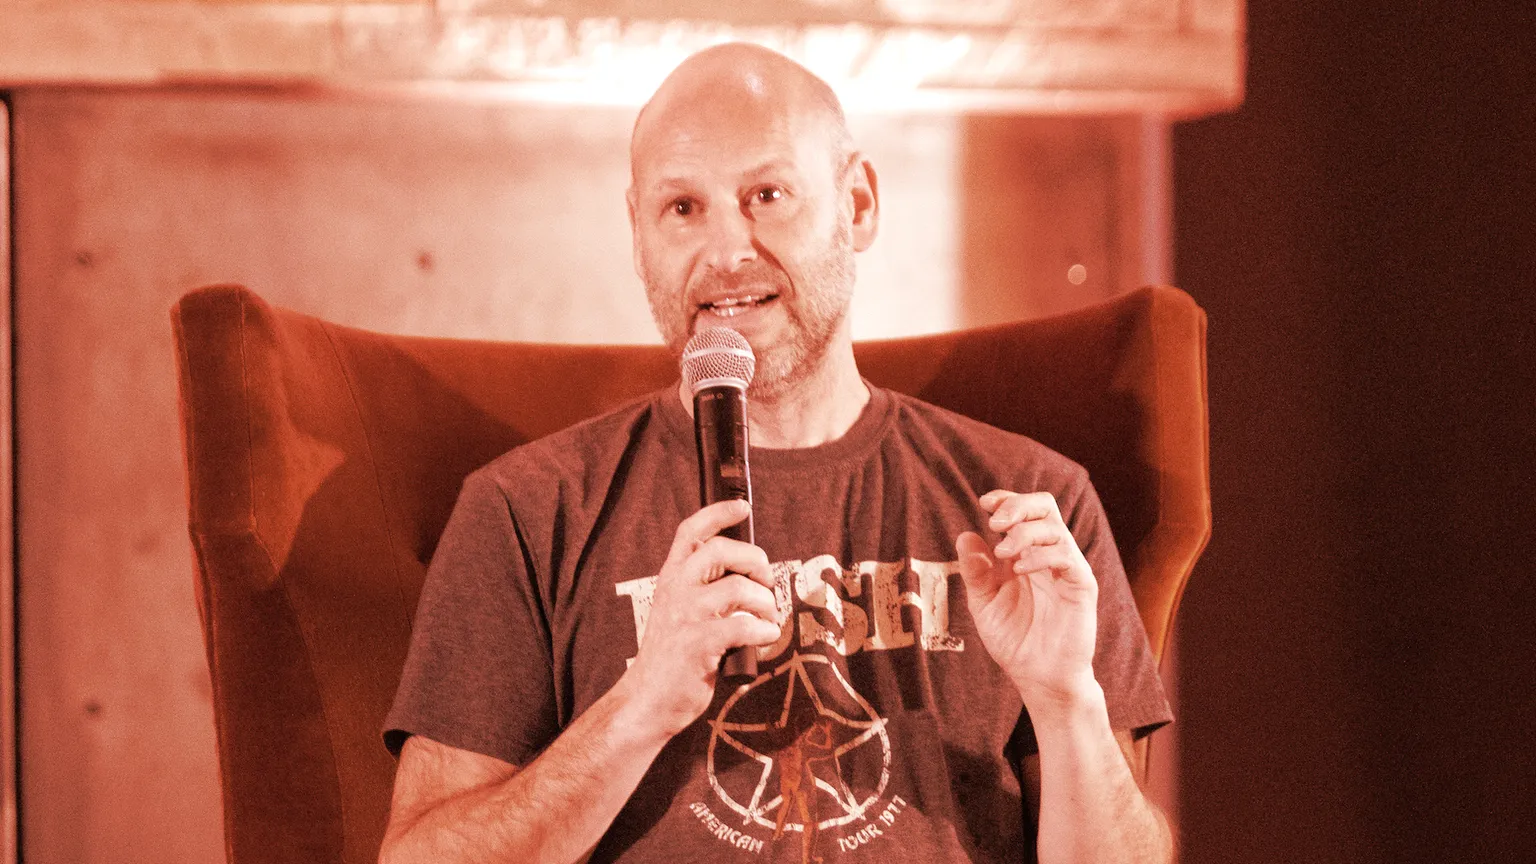 Ethereum co-founder Joe Lubin speaks at Camp Ethereal 2022. Image: Chie Endo